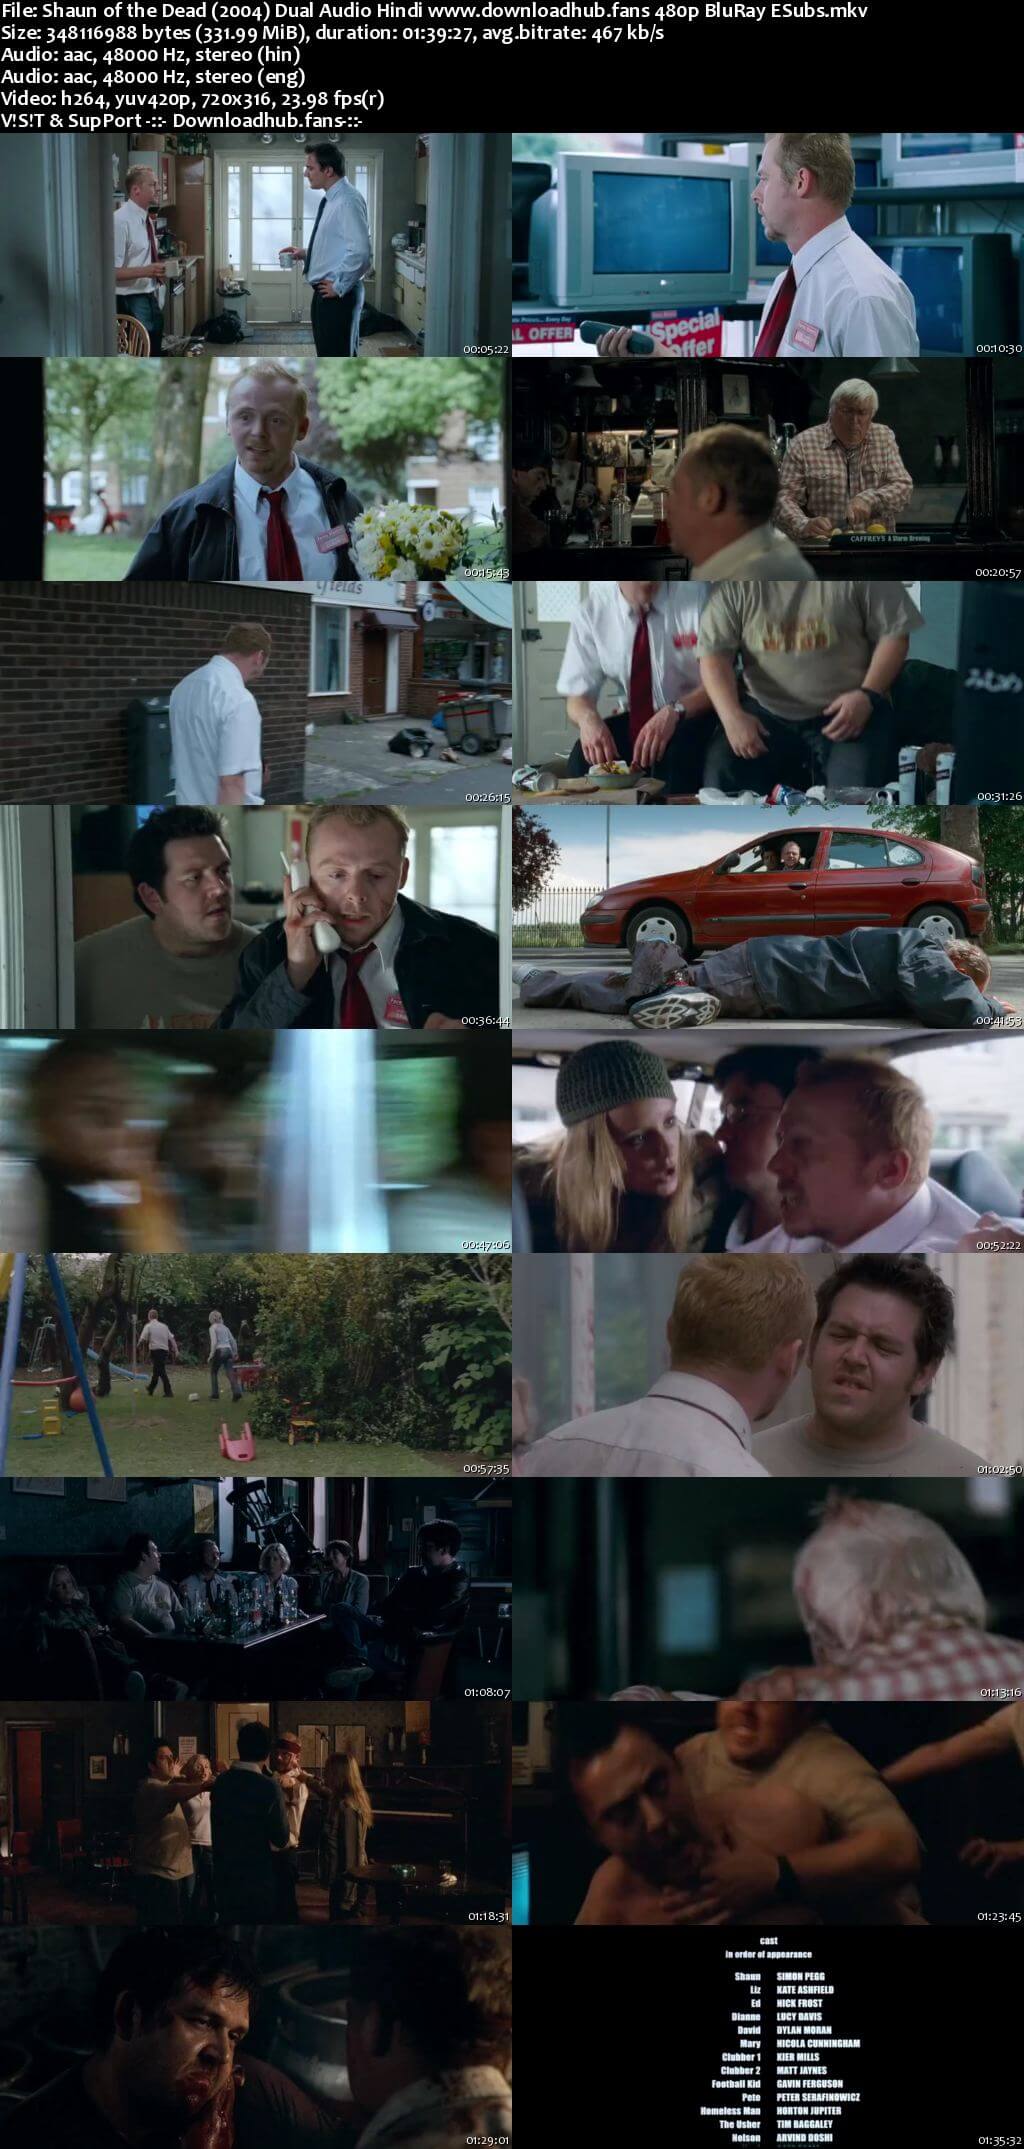 shaun of the dead watch online 123movies